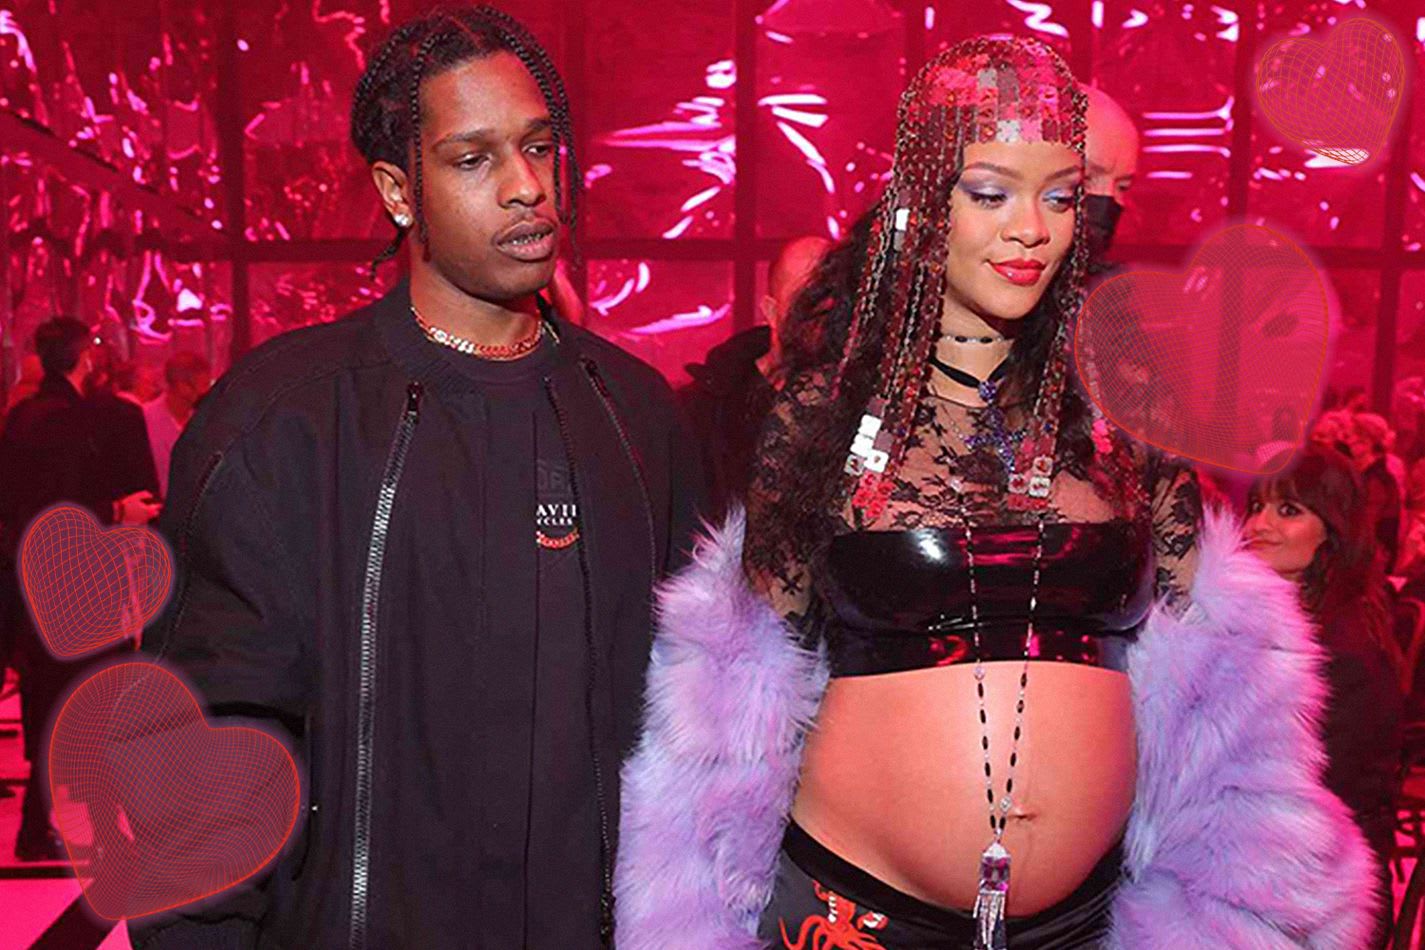 Rihanna and ASAP Rocky together